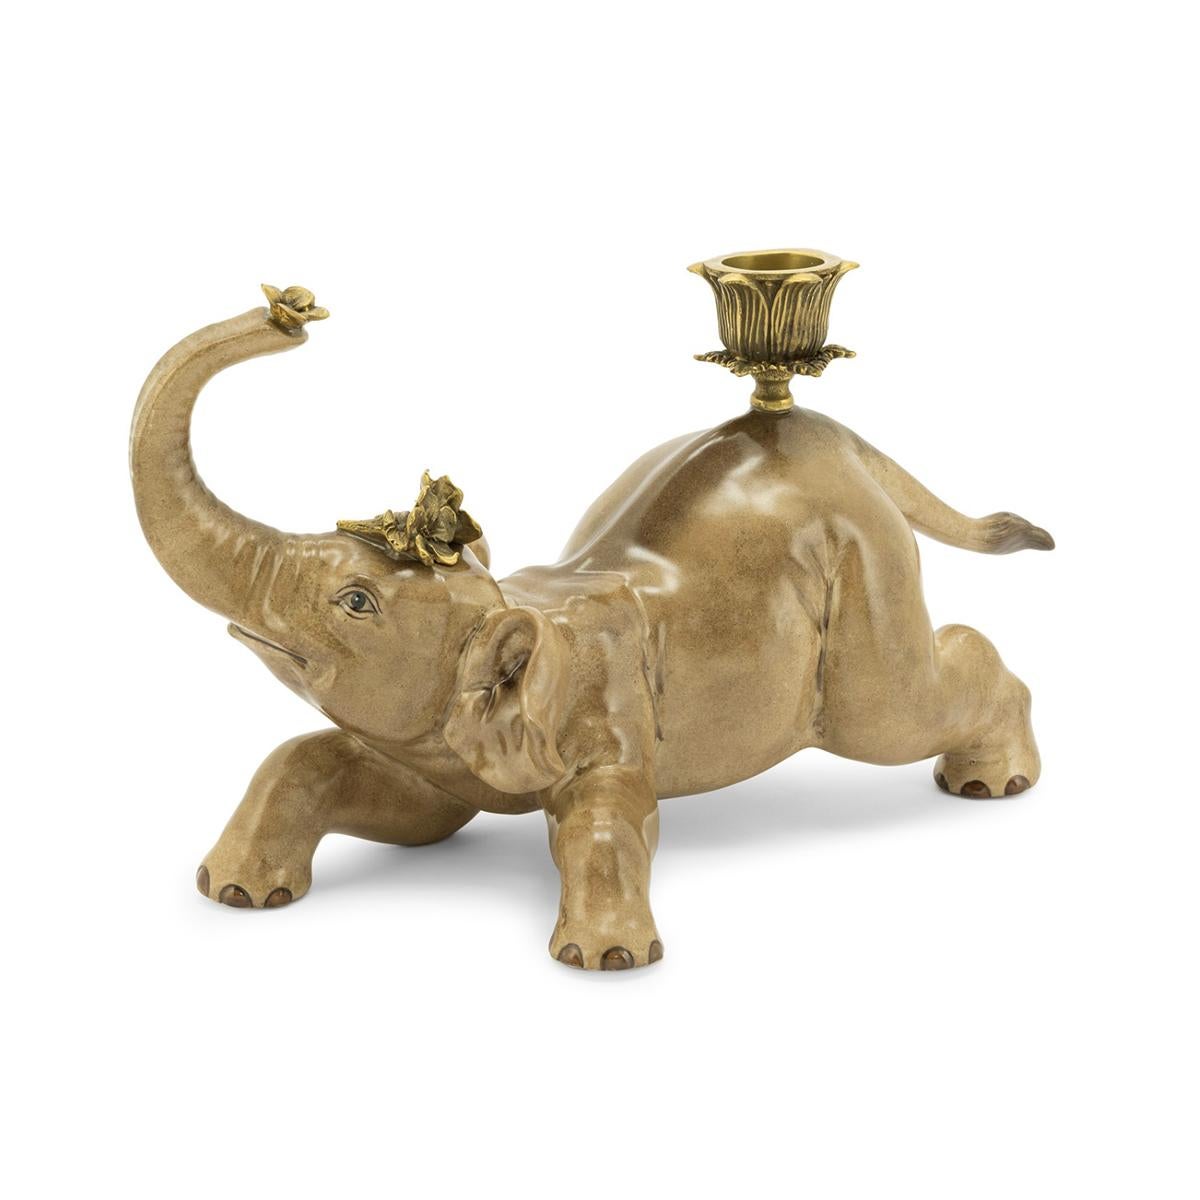 Candleholders Bengali elephant set of 2,
in hand painted porcelain in bronze finish.
With brass candleholder part on each.
Measures: L 28 x D 13 x H 17cm, each.